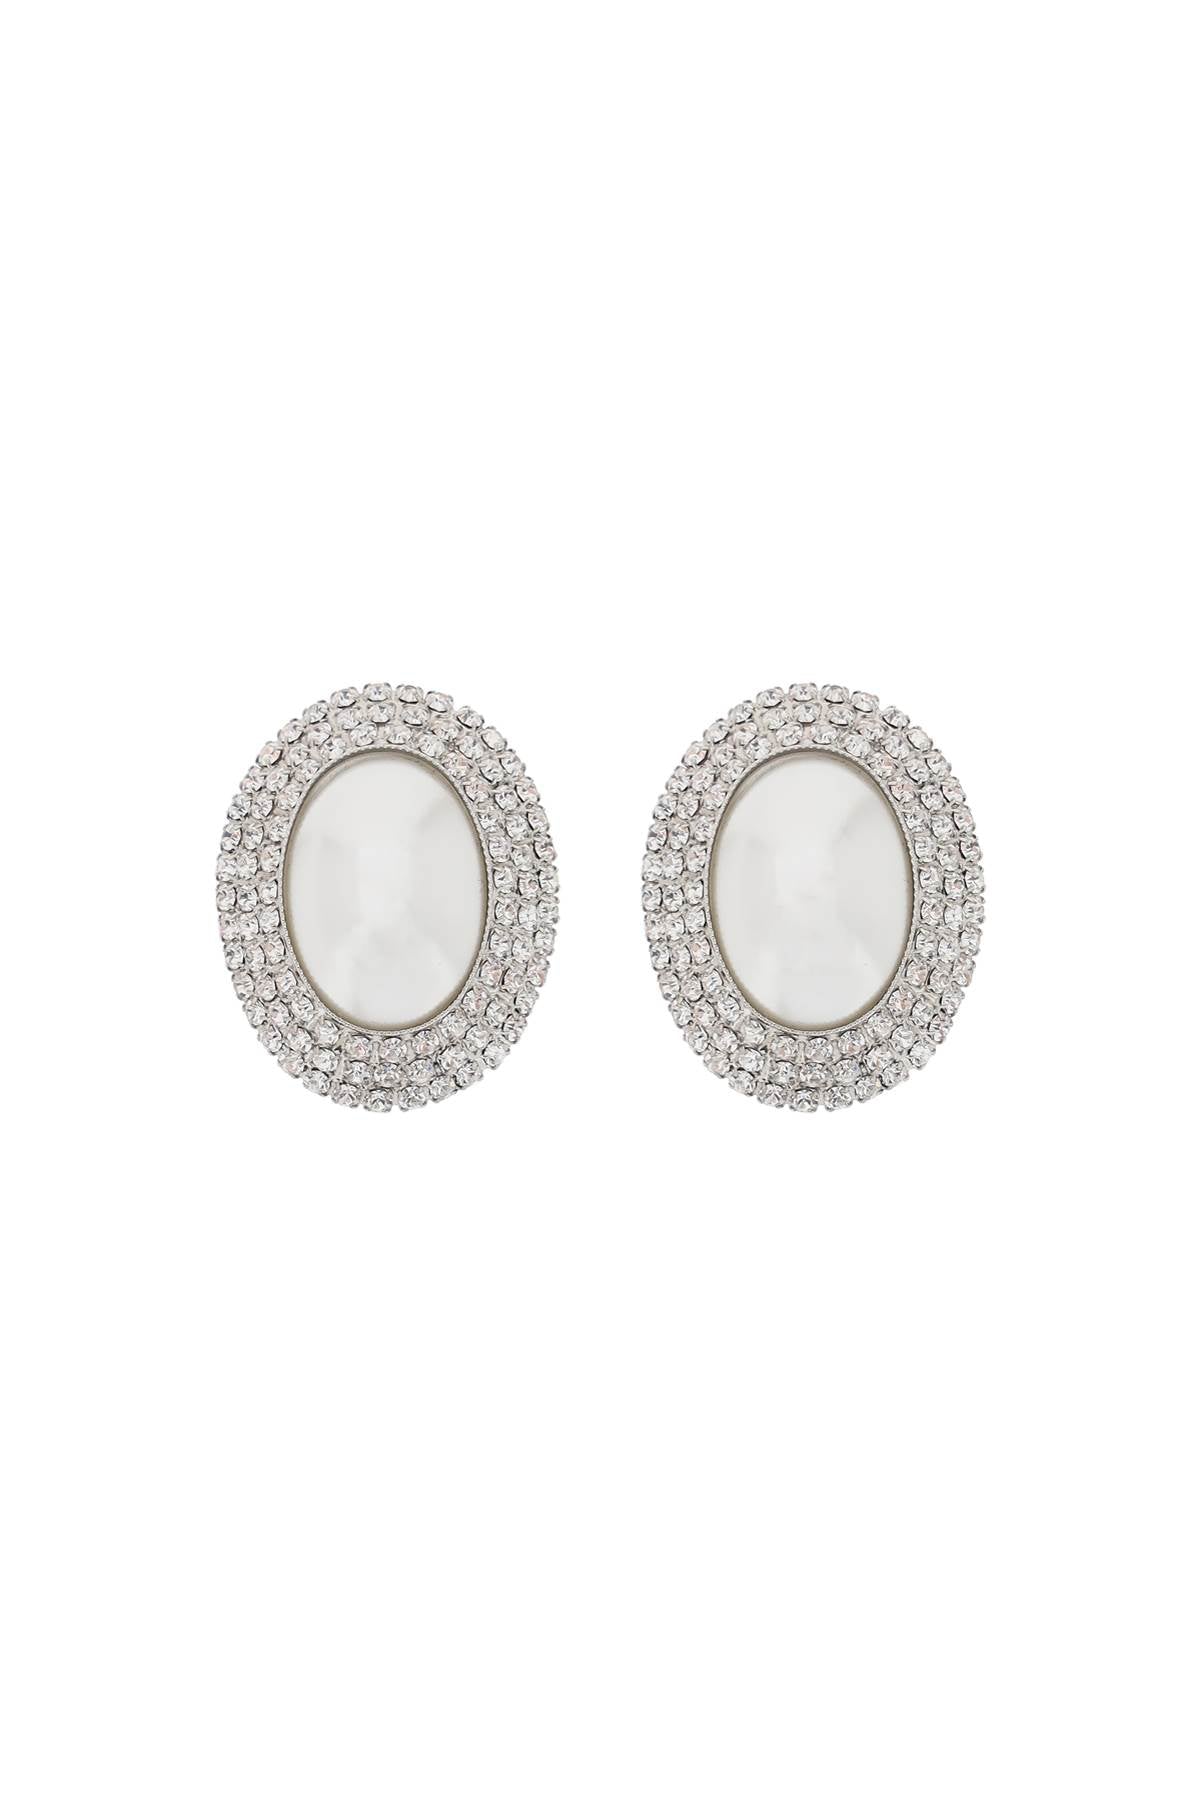 Alessandra Rich Alessandra rich oval earrings with pearl and crystals